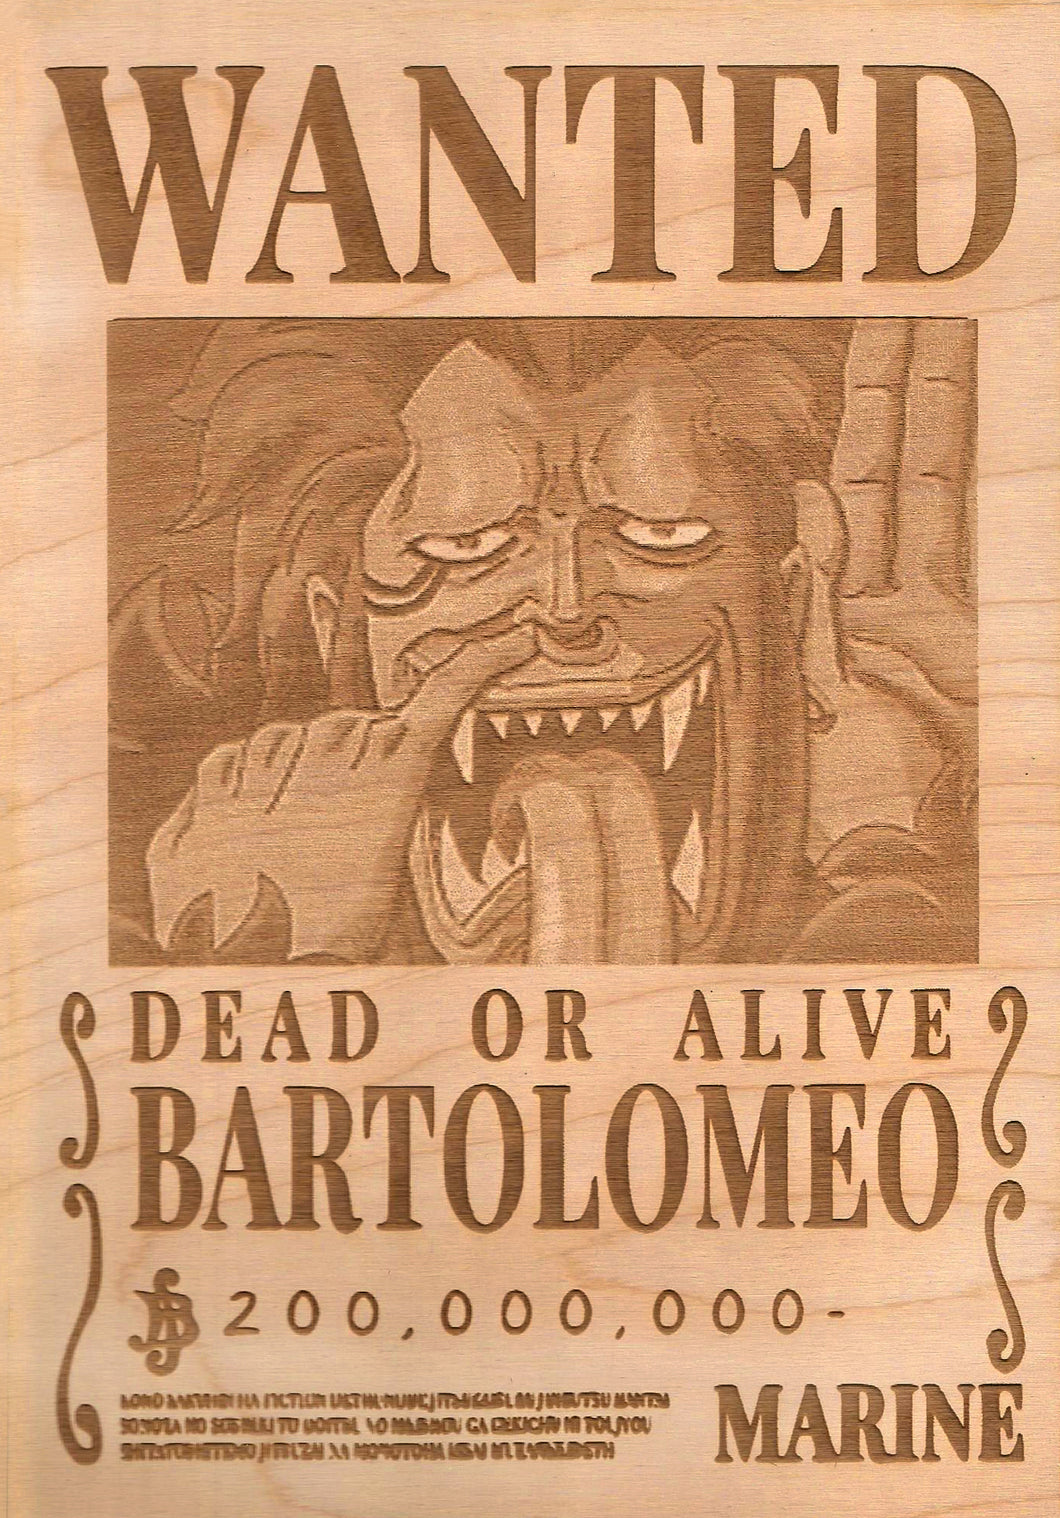 One Piece -Bartolomeo Wanted Poster - TantrumCollectibles.com